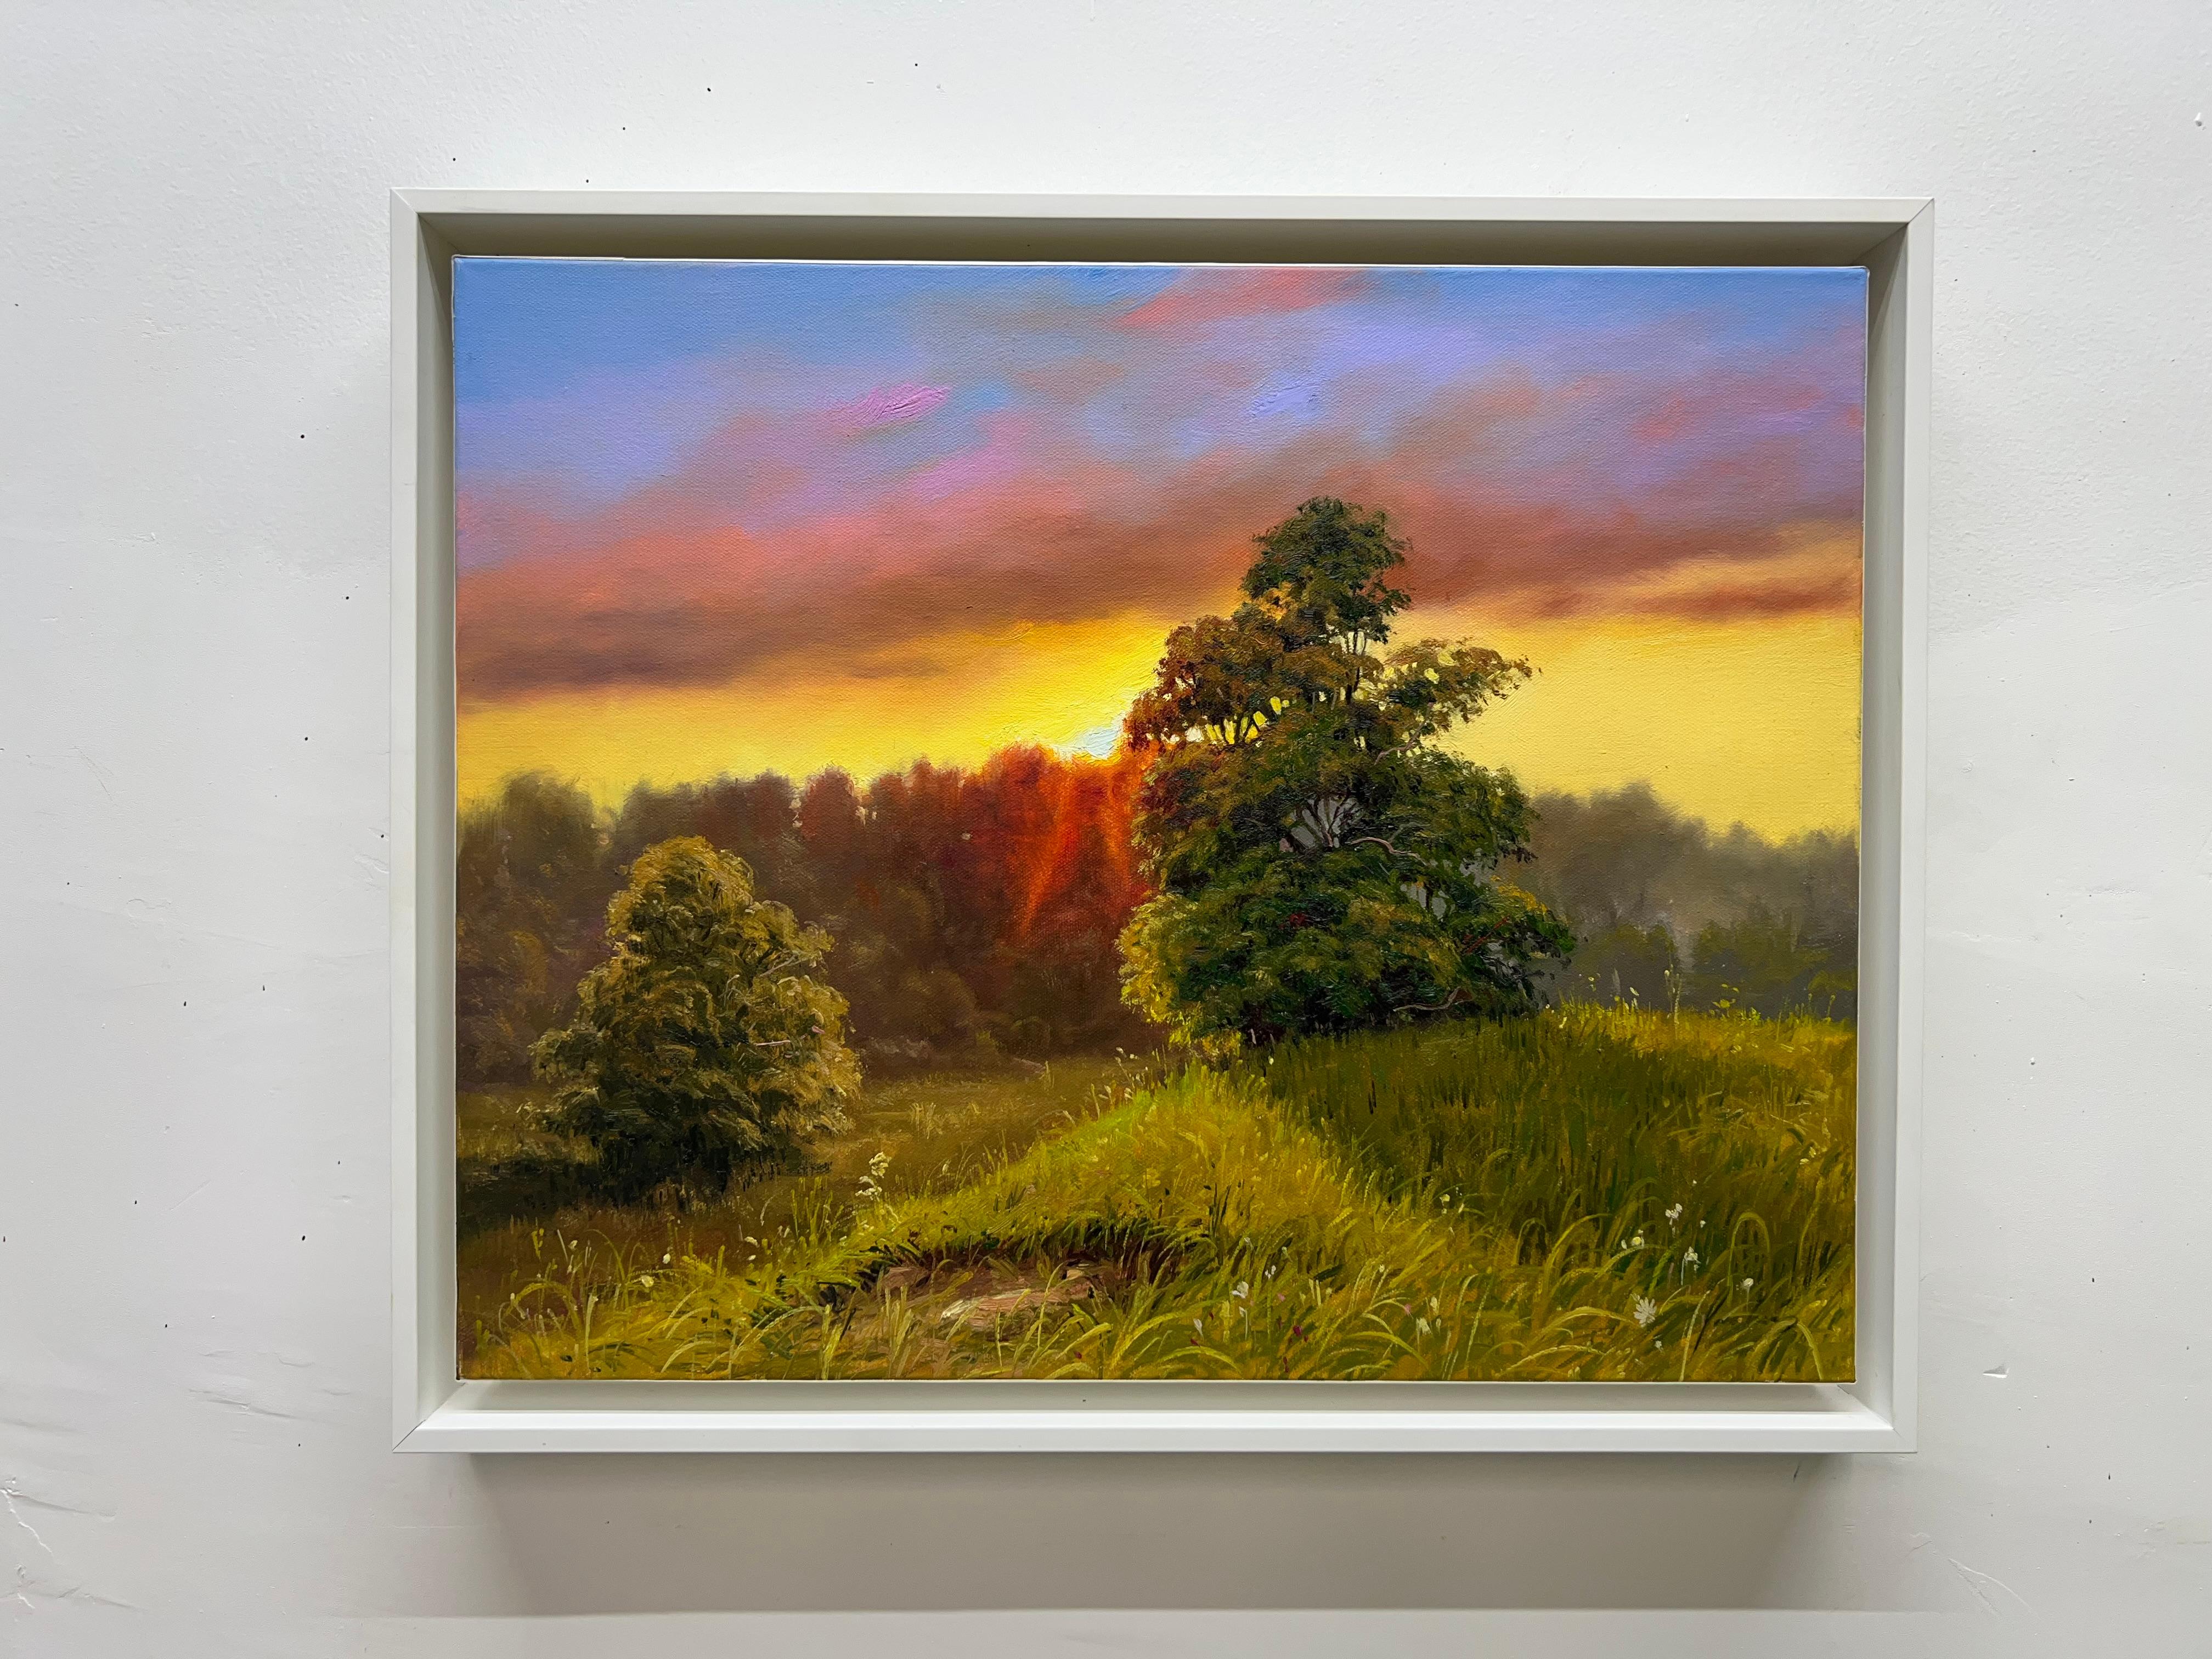 <p>Artist Comments<br>A magical sunset unfolds in artist Jose Luis Bermudez's realistic piece. The sky glows in gold and pink tones as the clouds slowly fade on the horizon. The setting sun leaves the landscape in a soft, warm light, saying goodbye